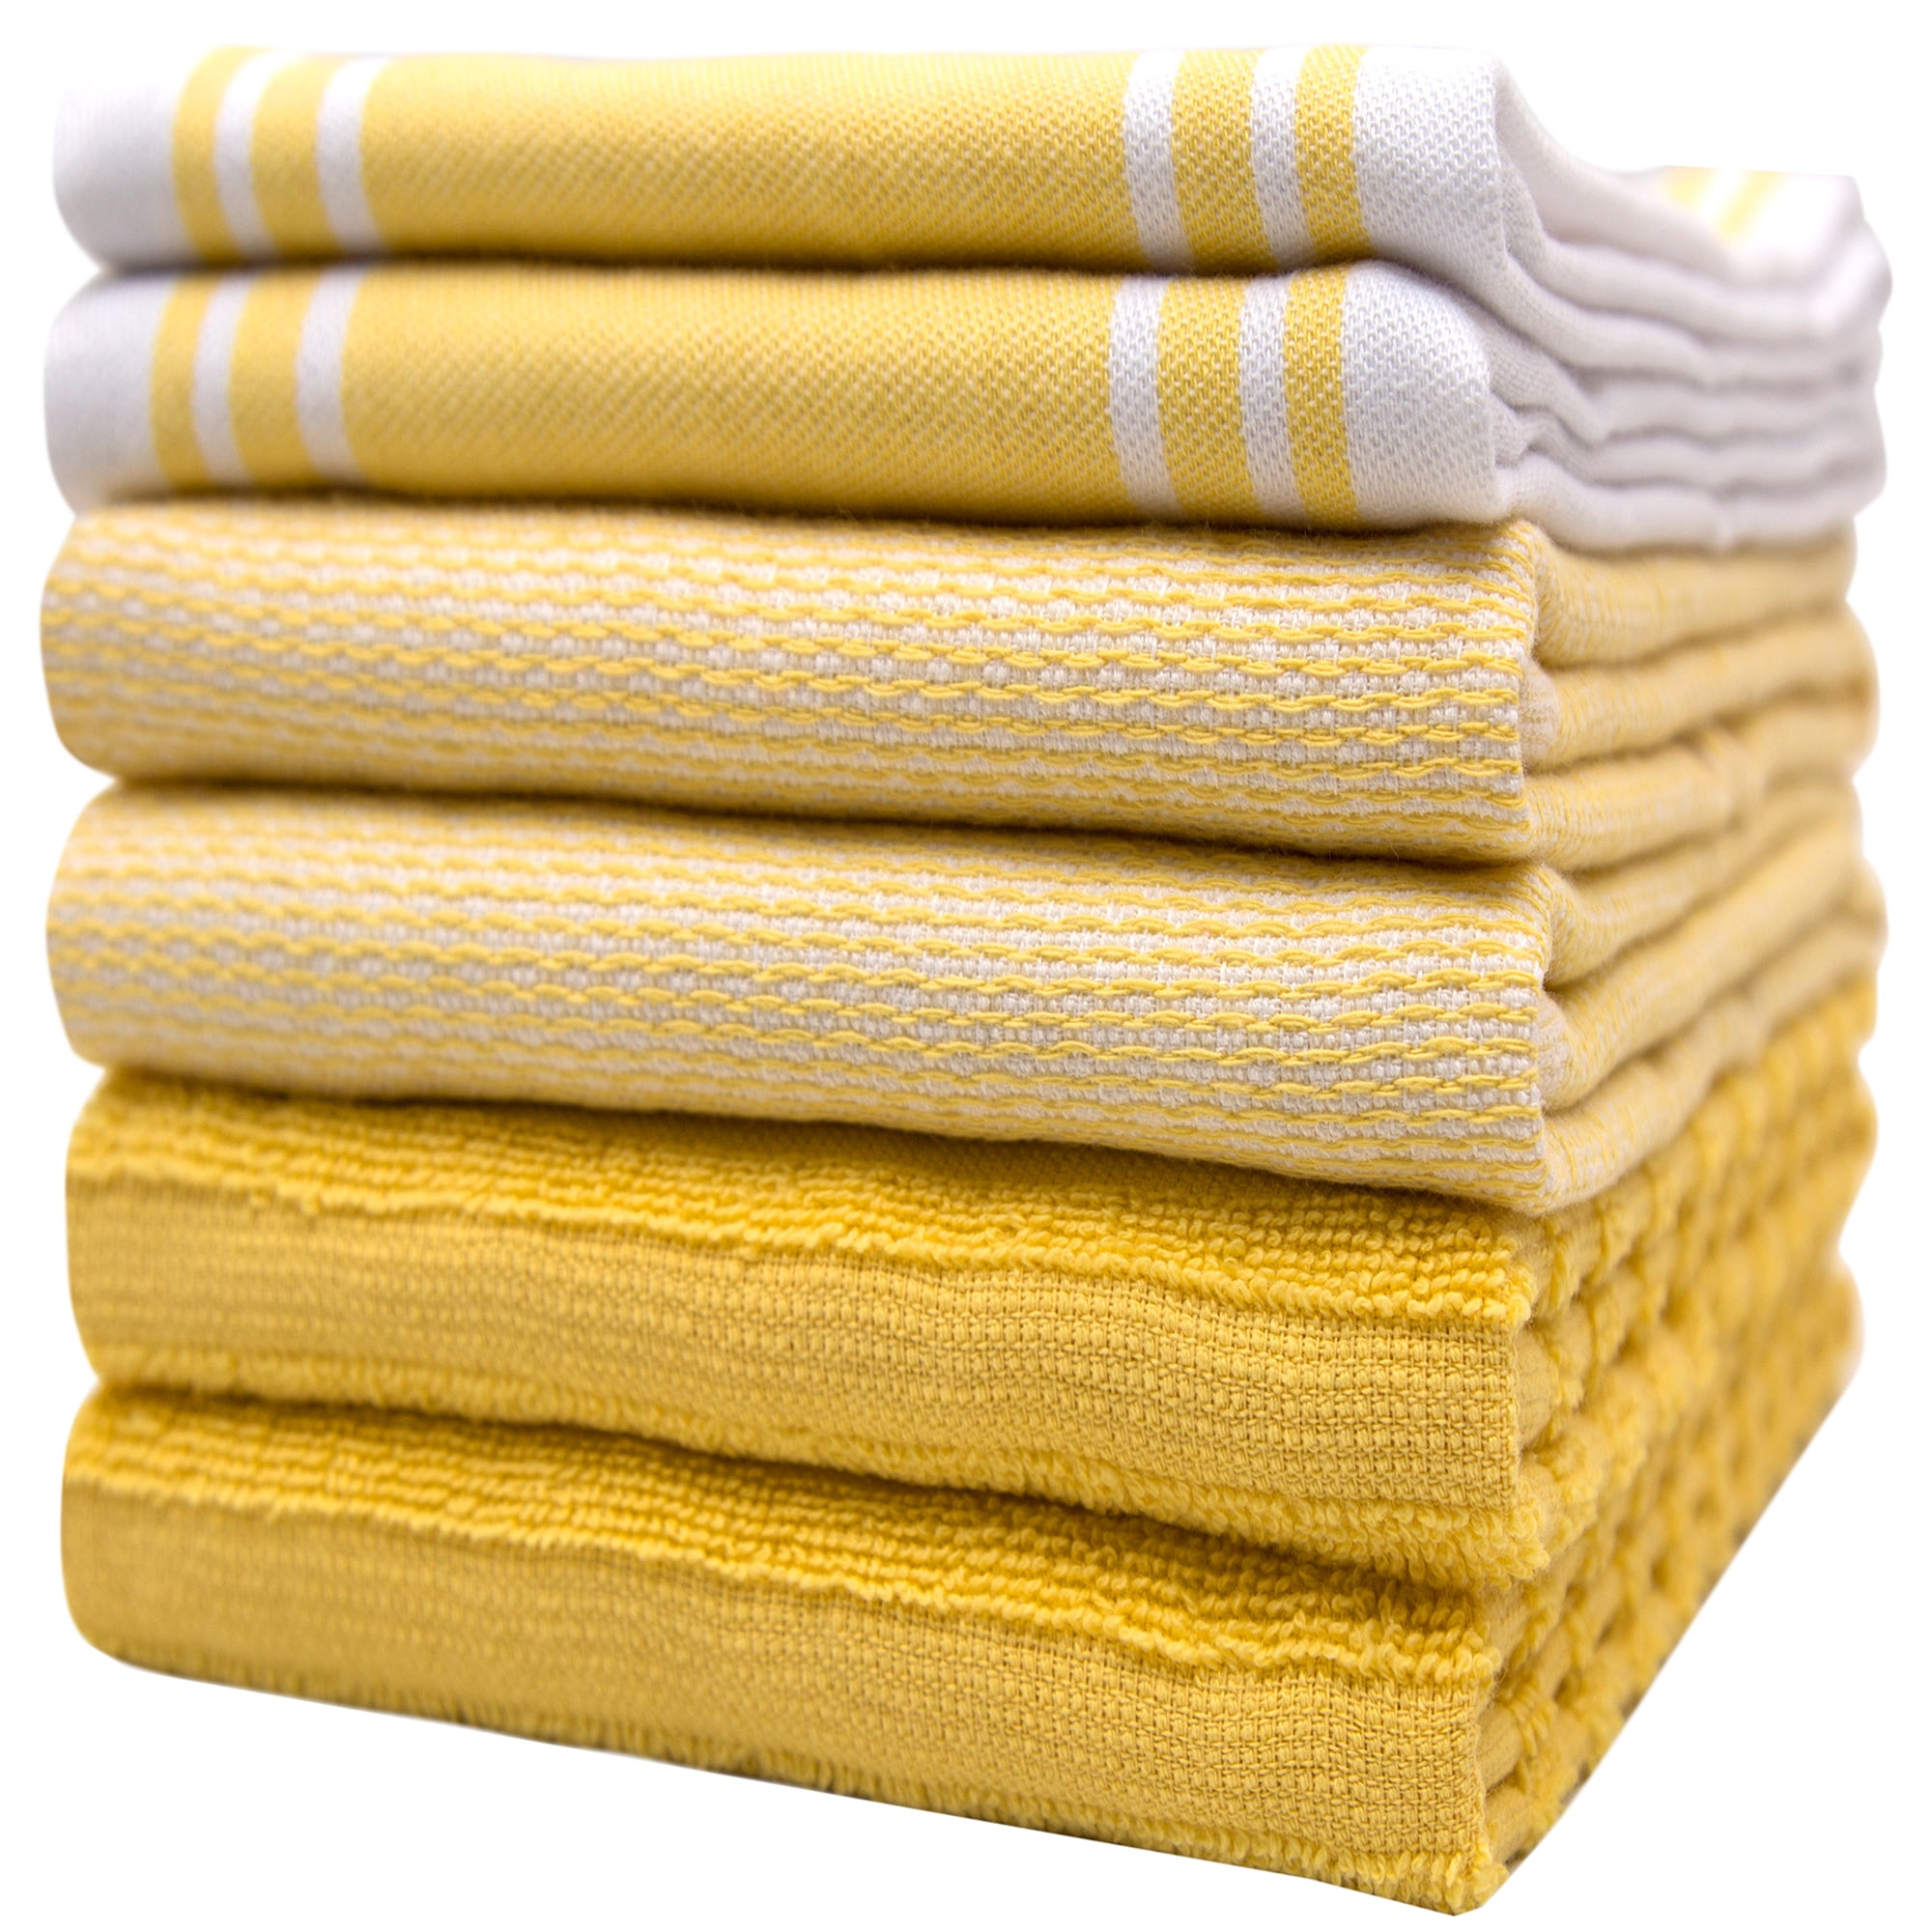 The Everplush Company Classic Terry Kitchen Towel, 6 Pack